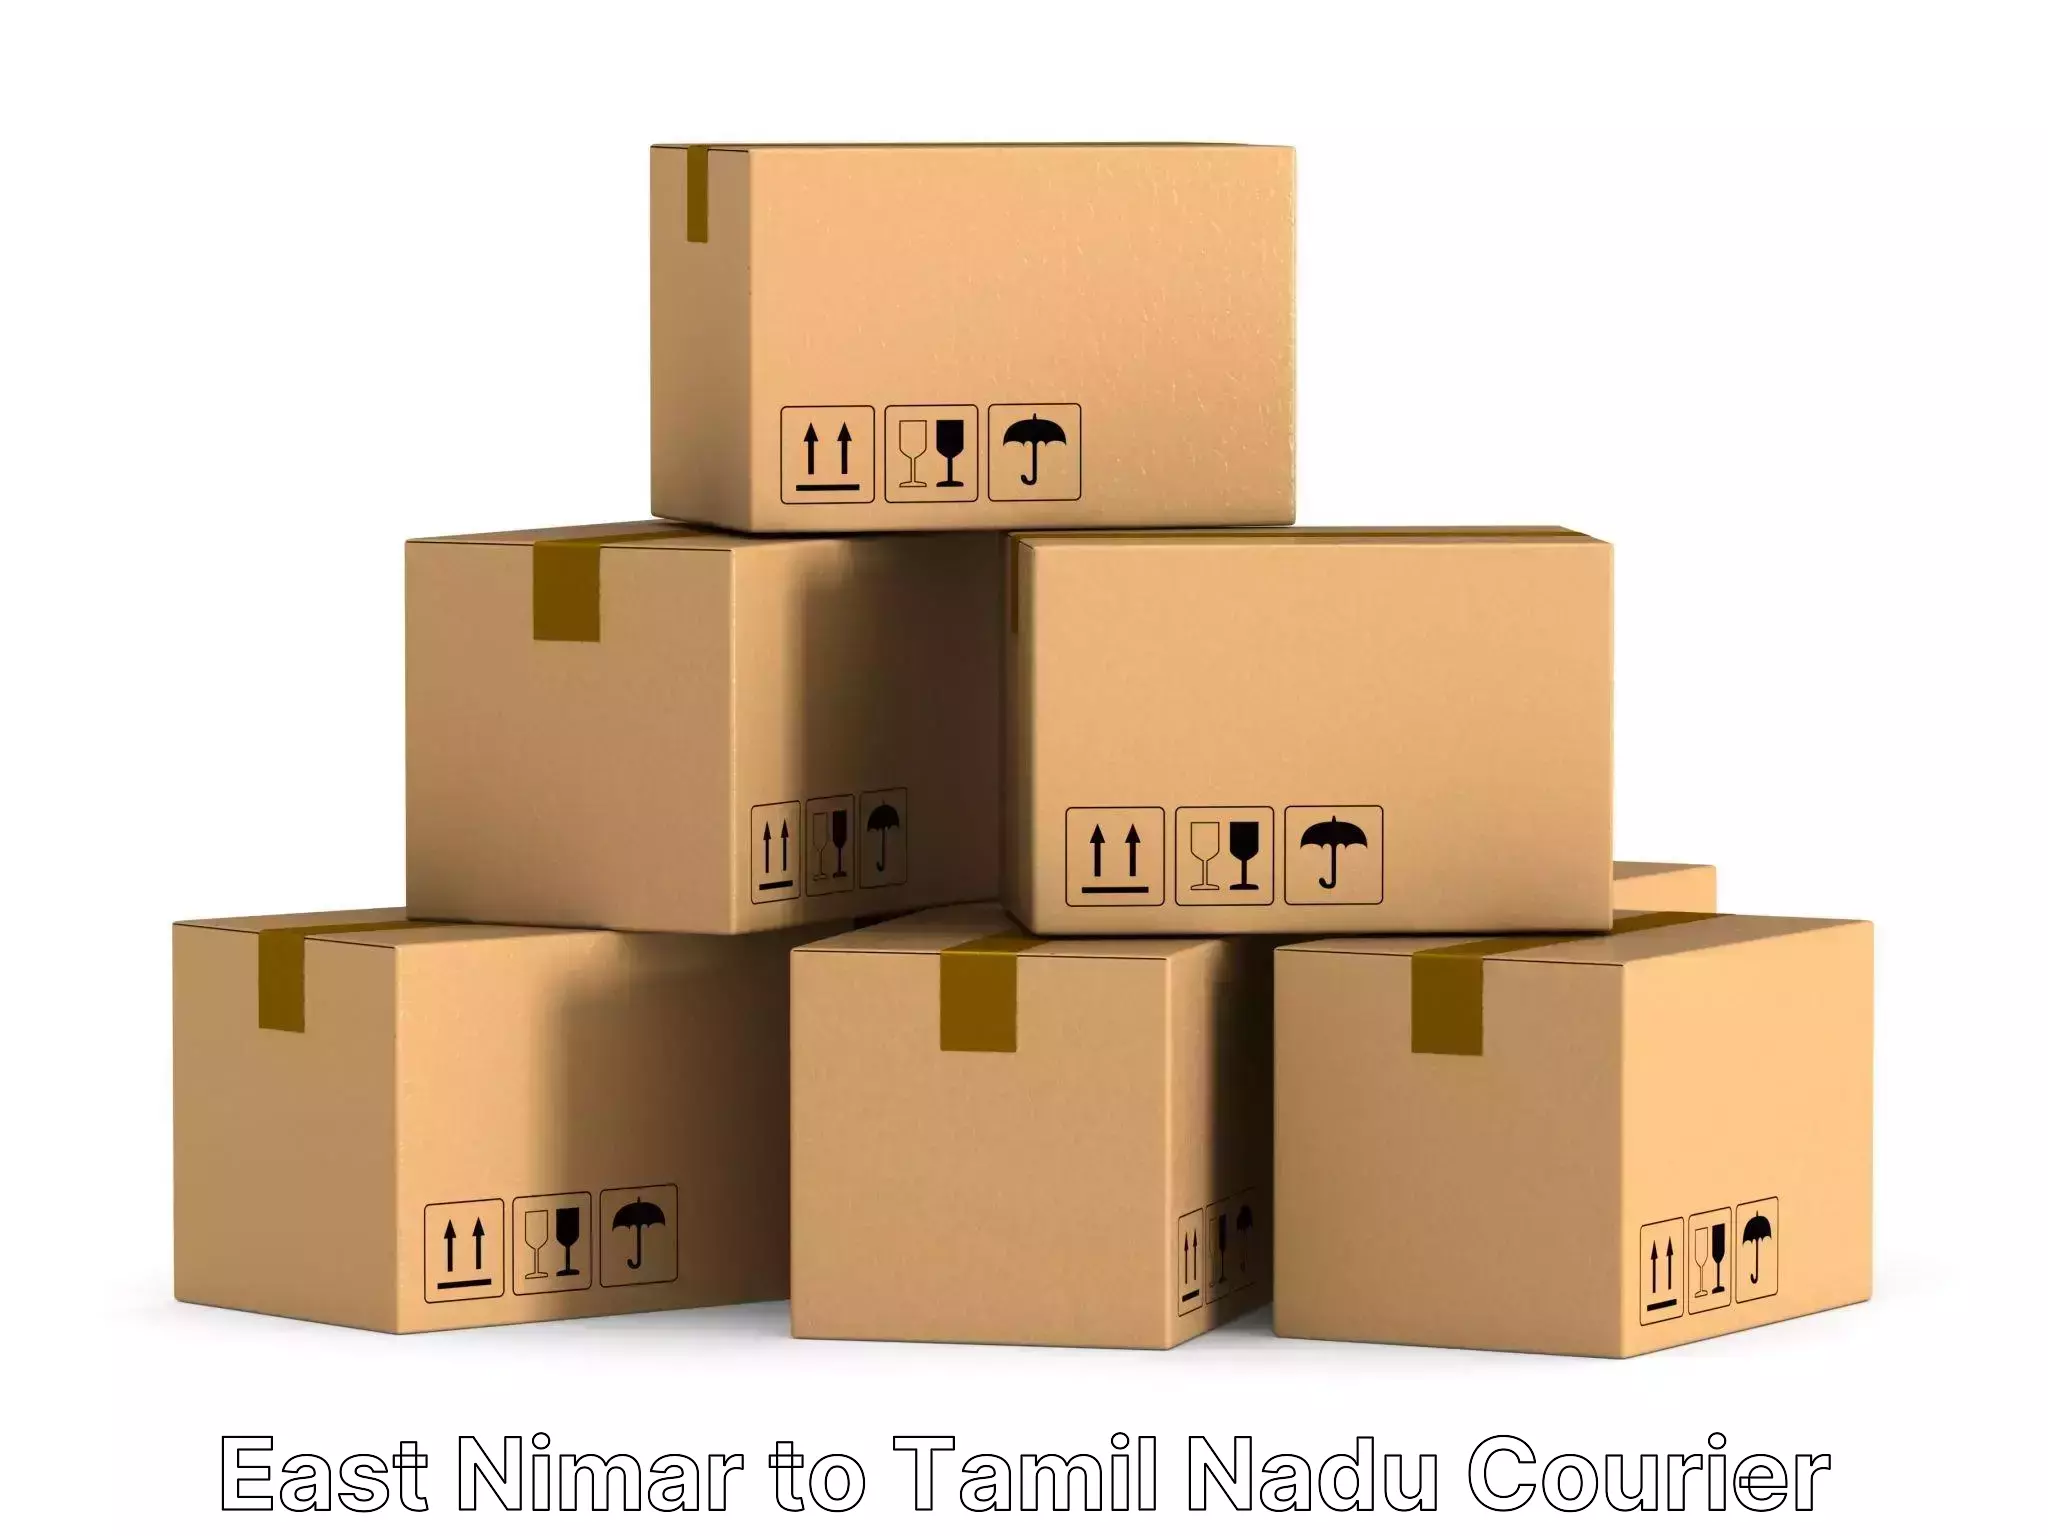 Moving and handling services East Nimar to Madurai